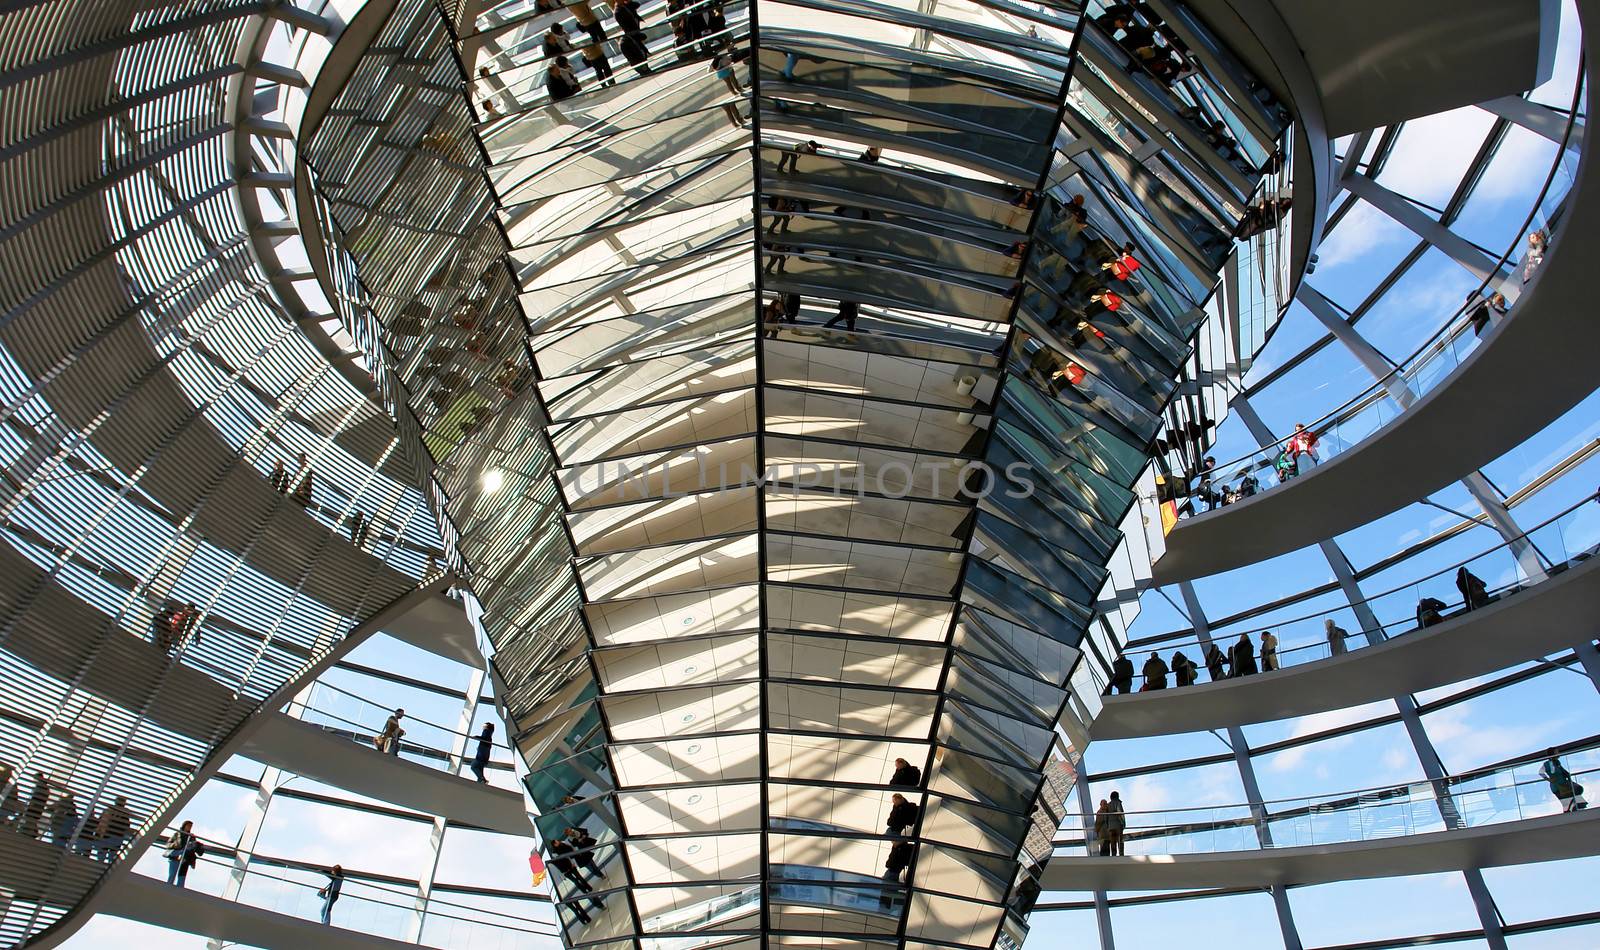 Modern dome of Reichstag (Germany's parliament building) in Berlin. Design by architect Norman Foster